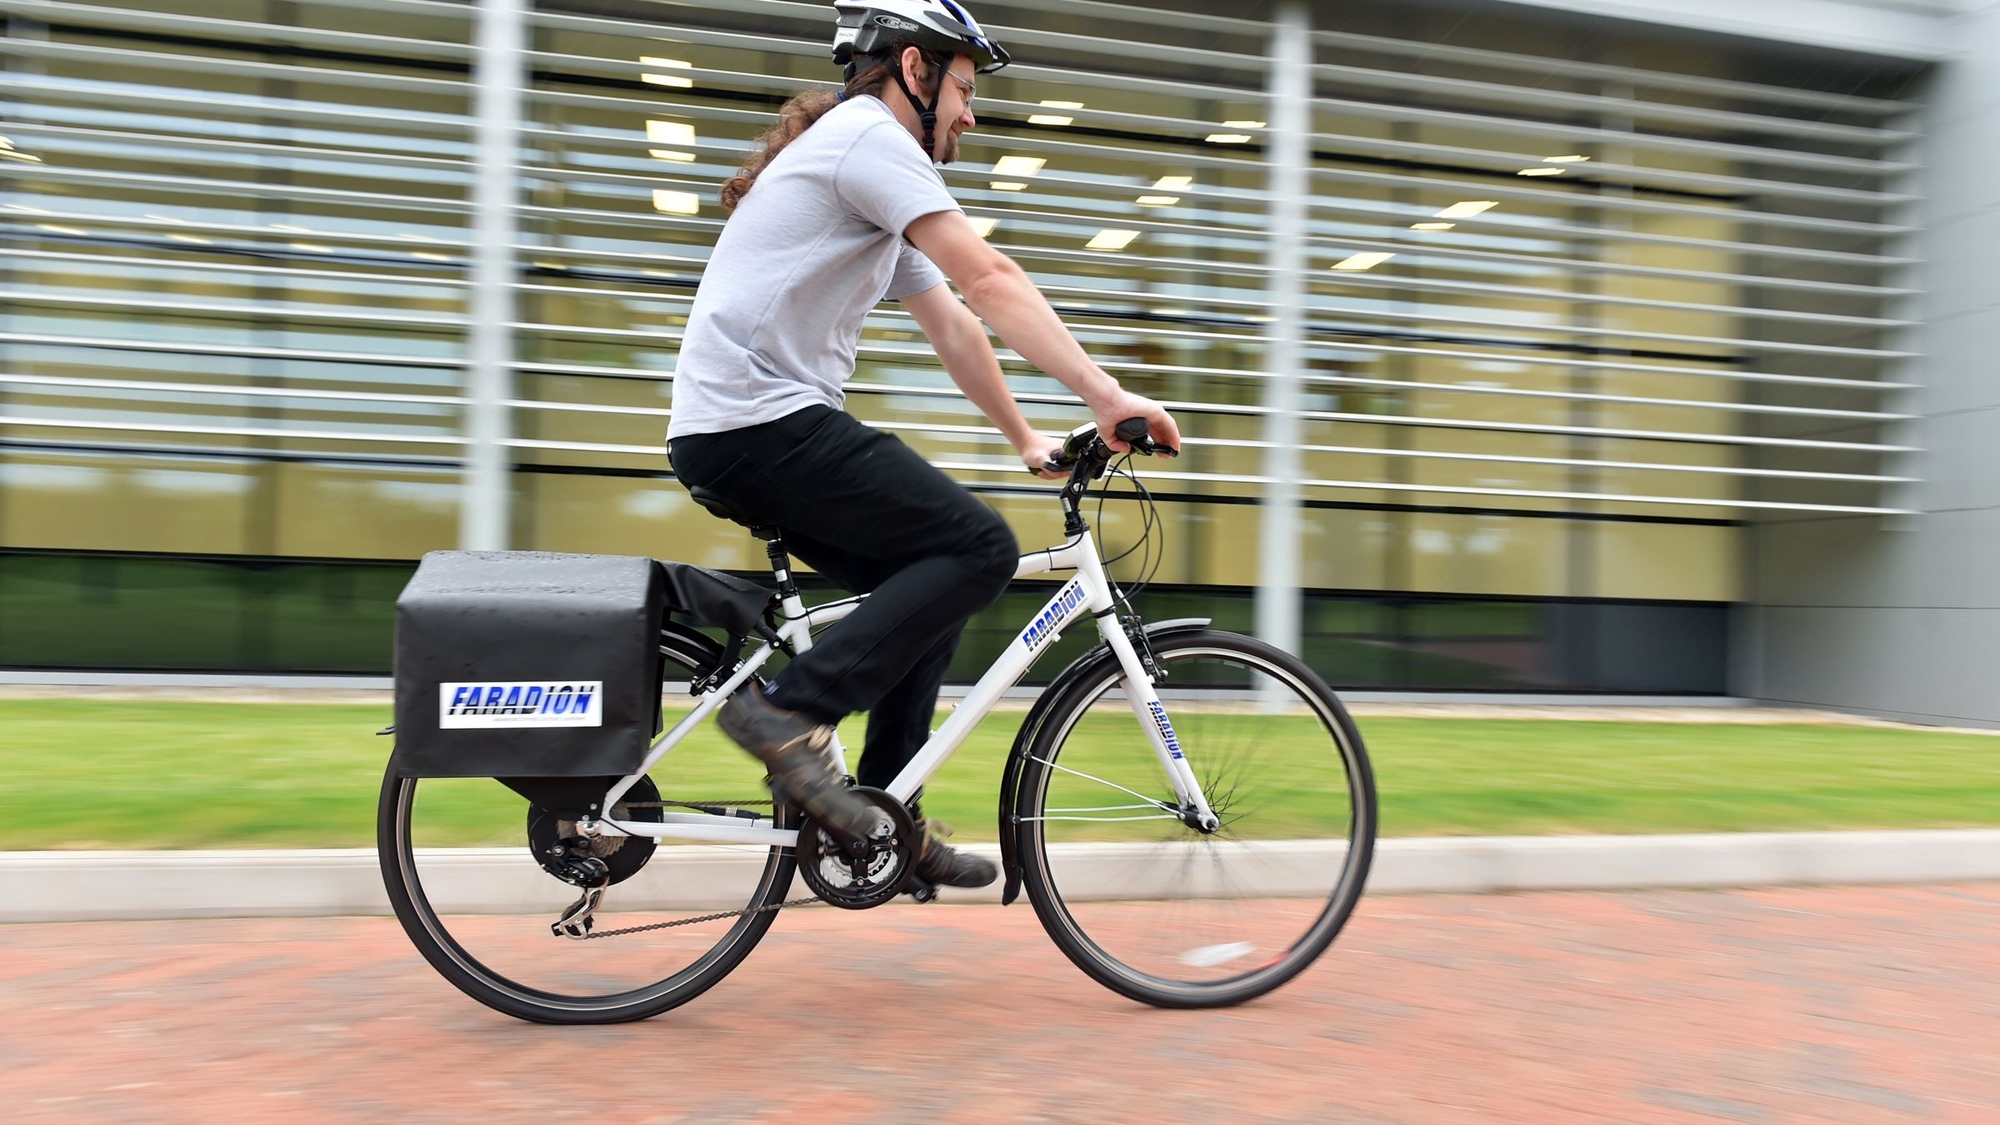 Faradion prototype electric bicycle powered by sodium-ion battery pack